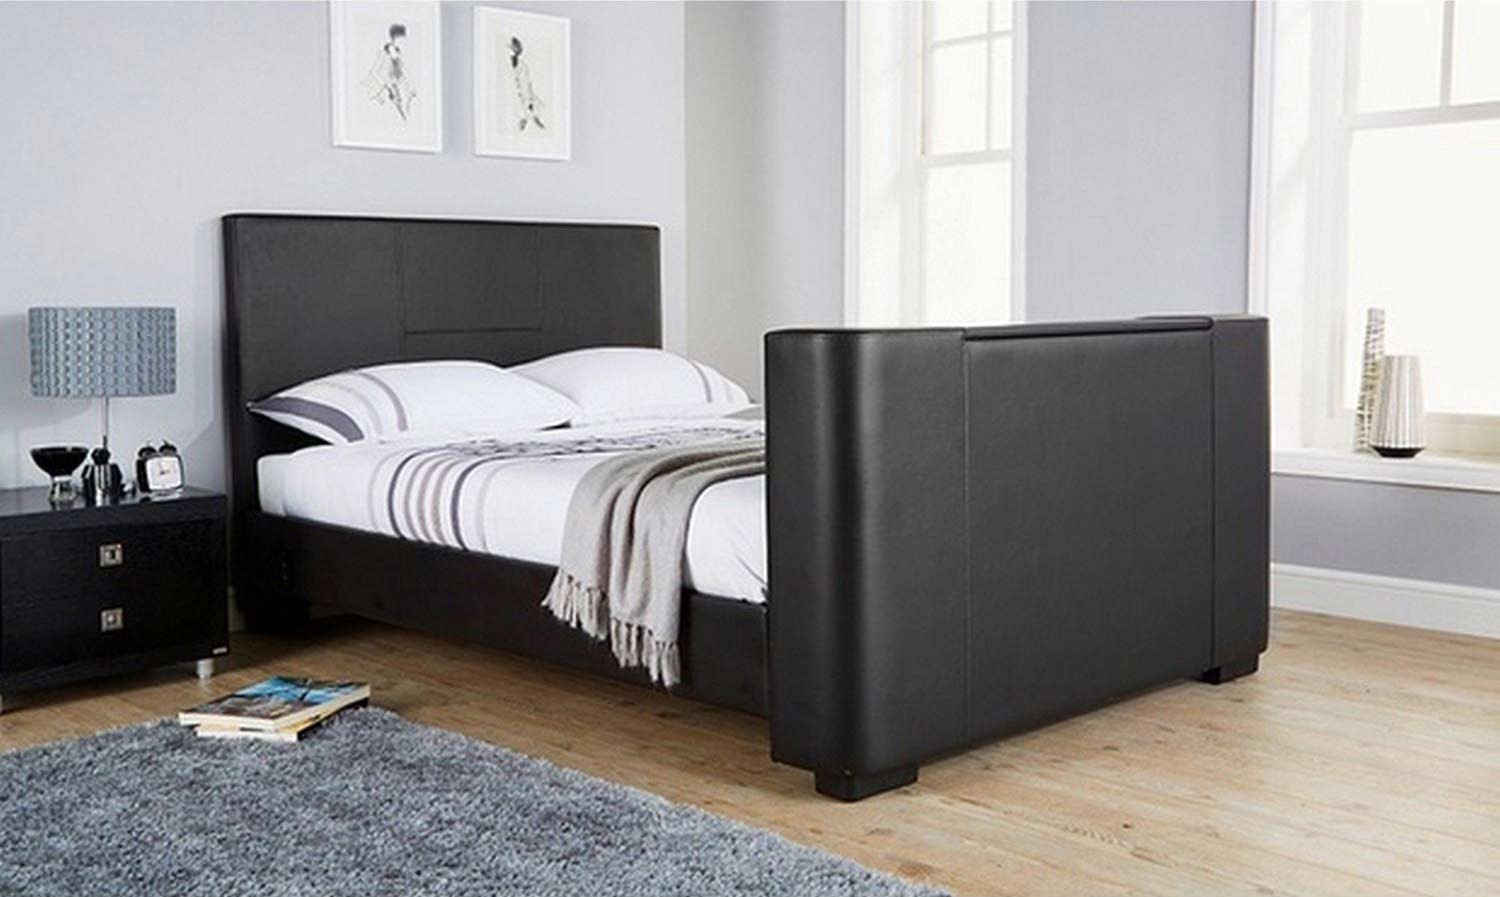 Newark TV Bed Assembly Instructions (GFW)